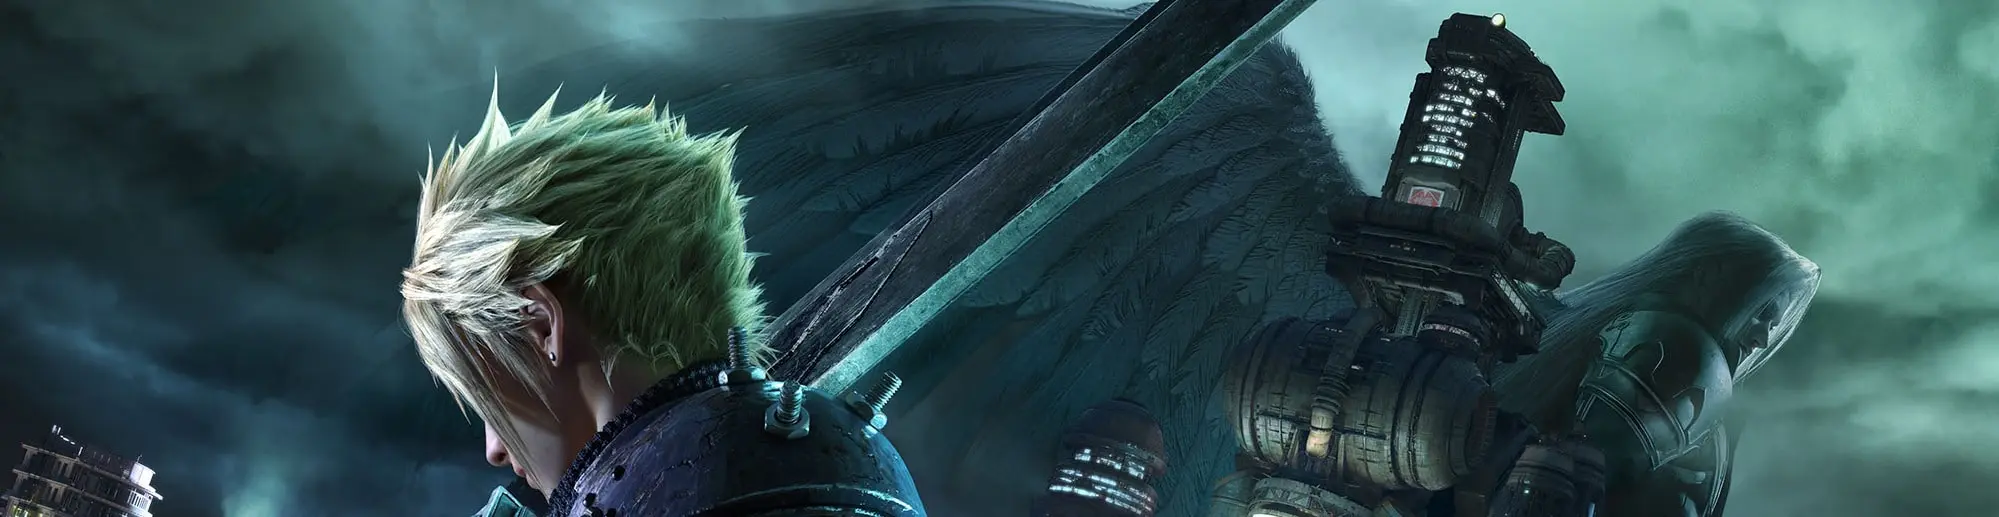 THE REBOOT OF A BELOVED CLASSIC: FINAL FANTASY VII REMAKE ARRIVES FEATURING  CONTRIBUTIONS BY VIRTUOS ART - Virtuos